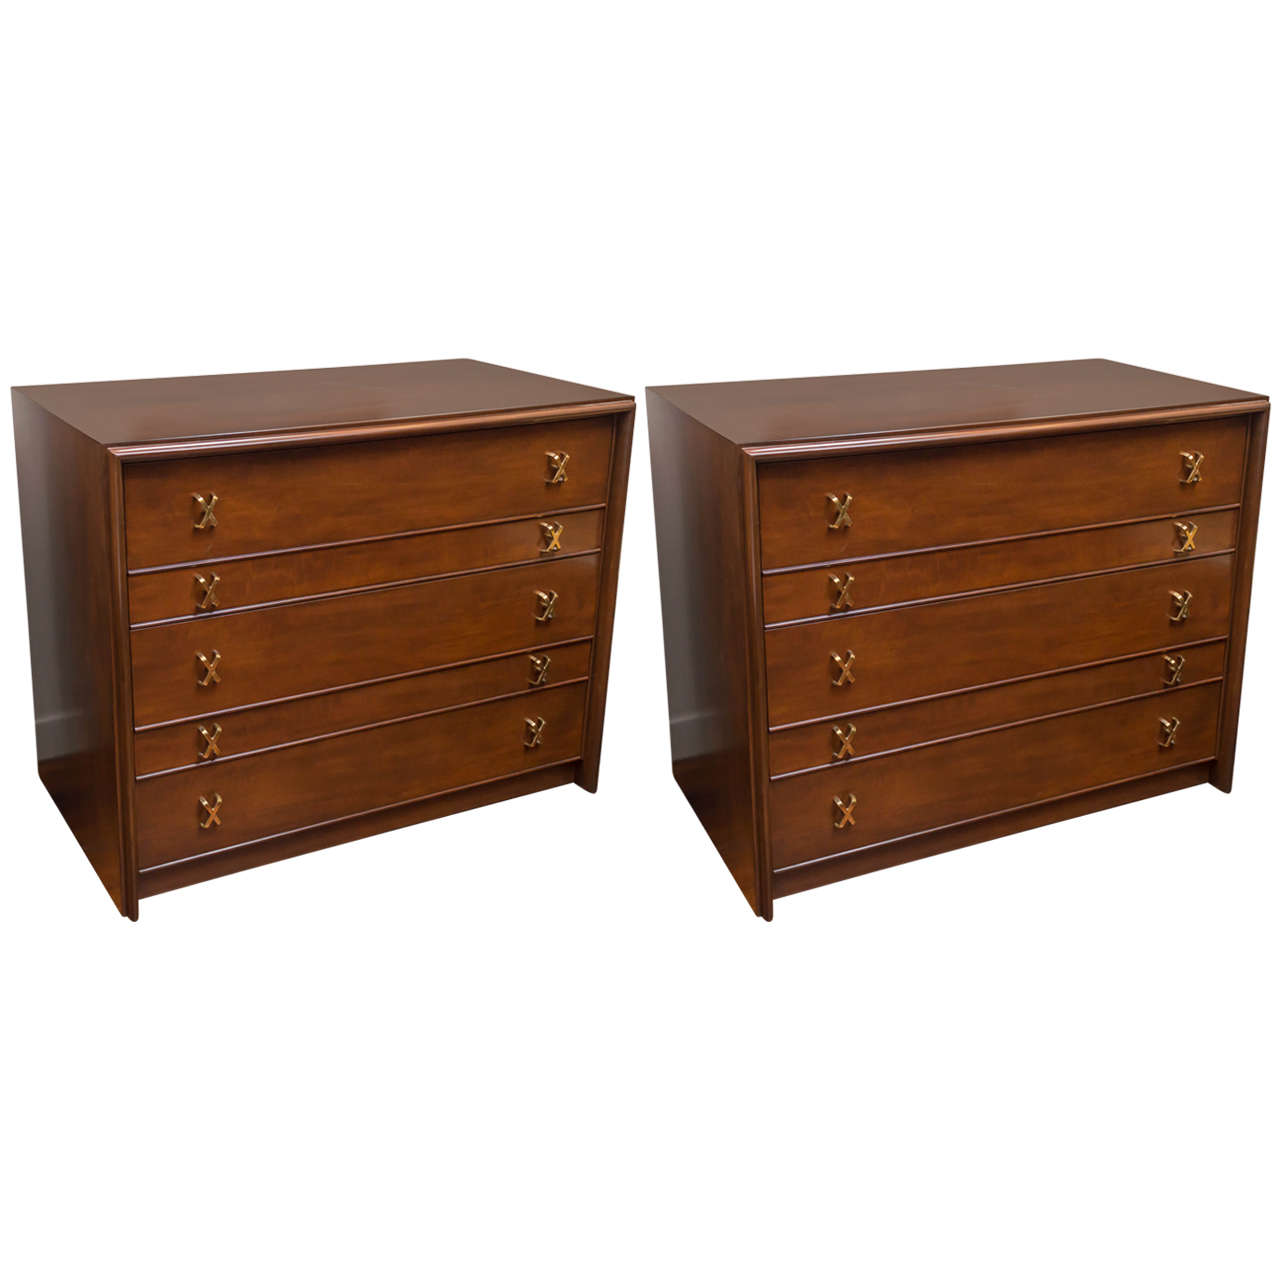 Paul Frankl Chests of Drawers